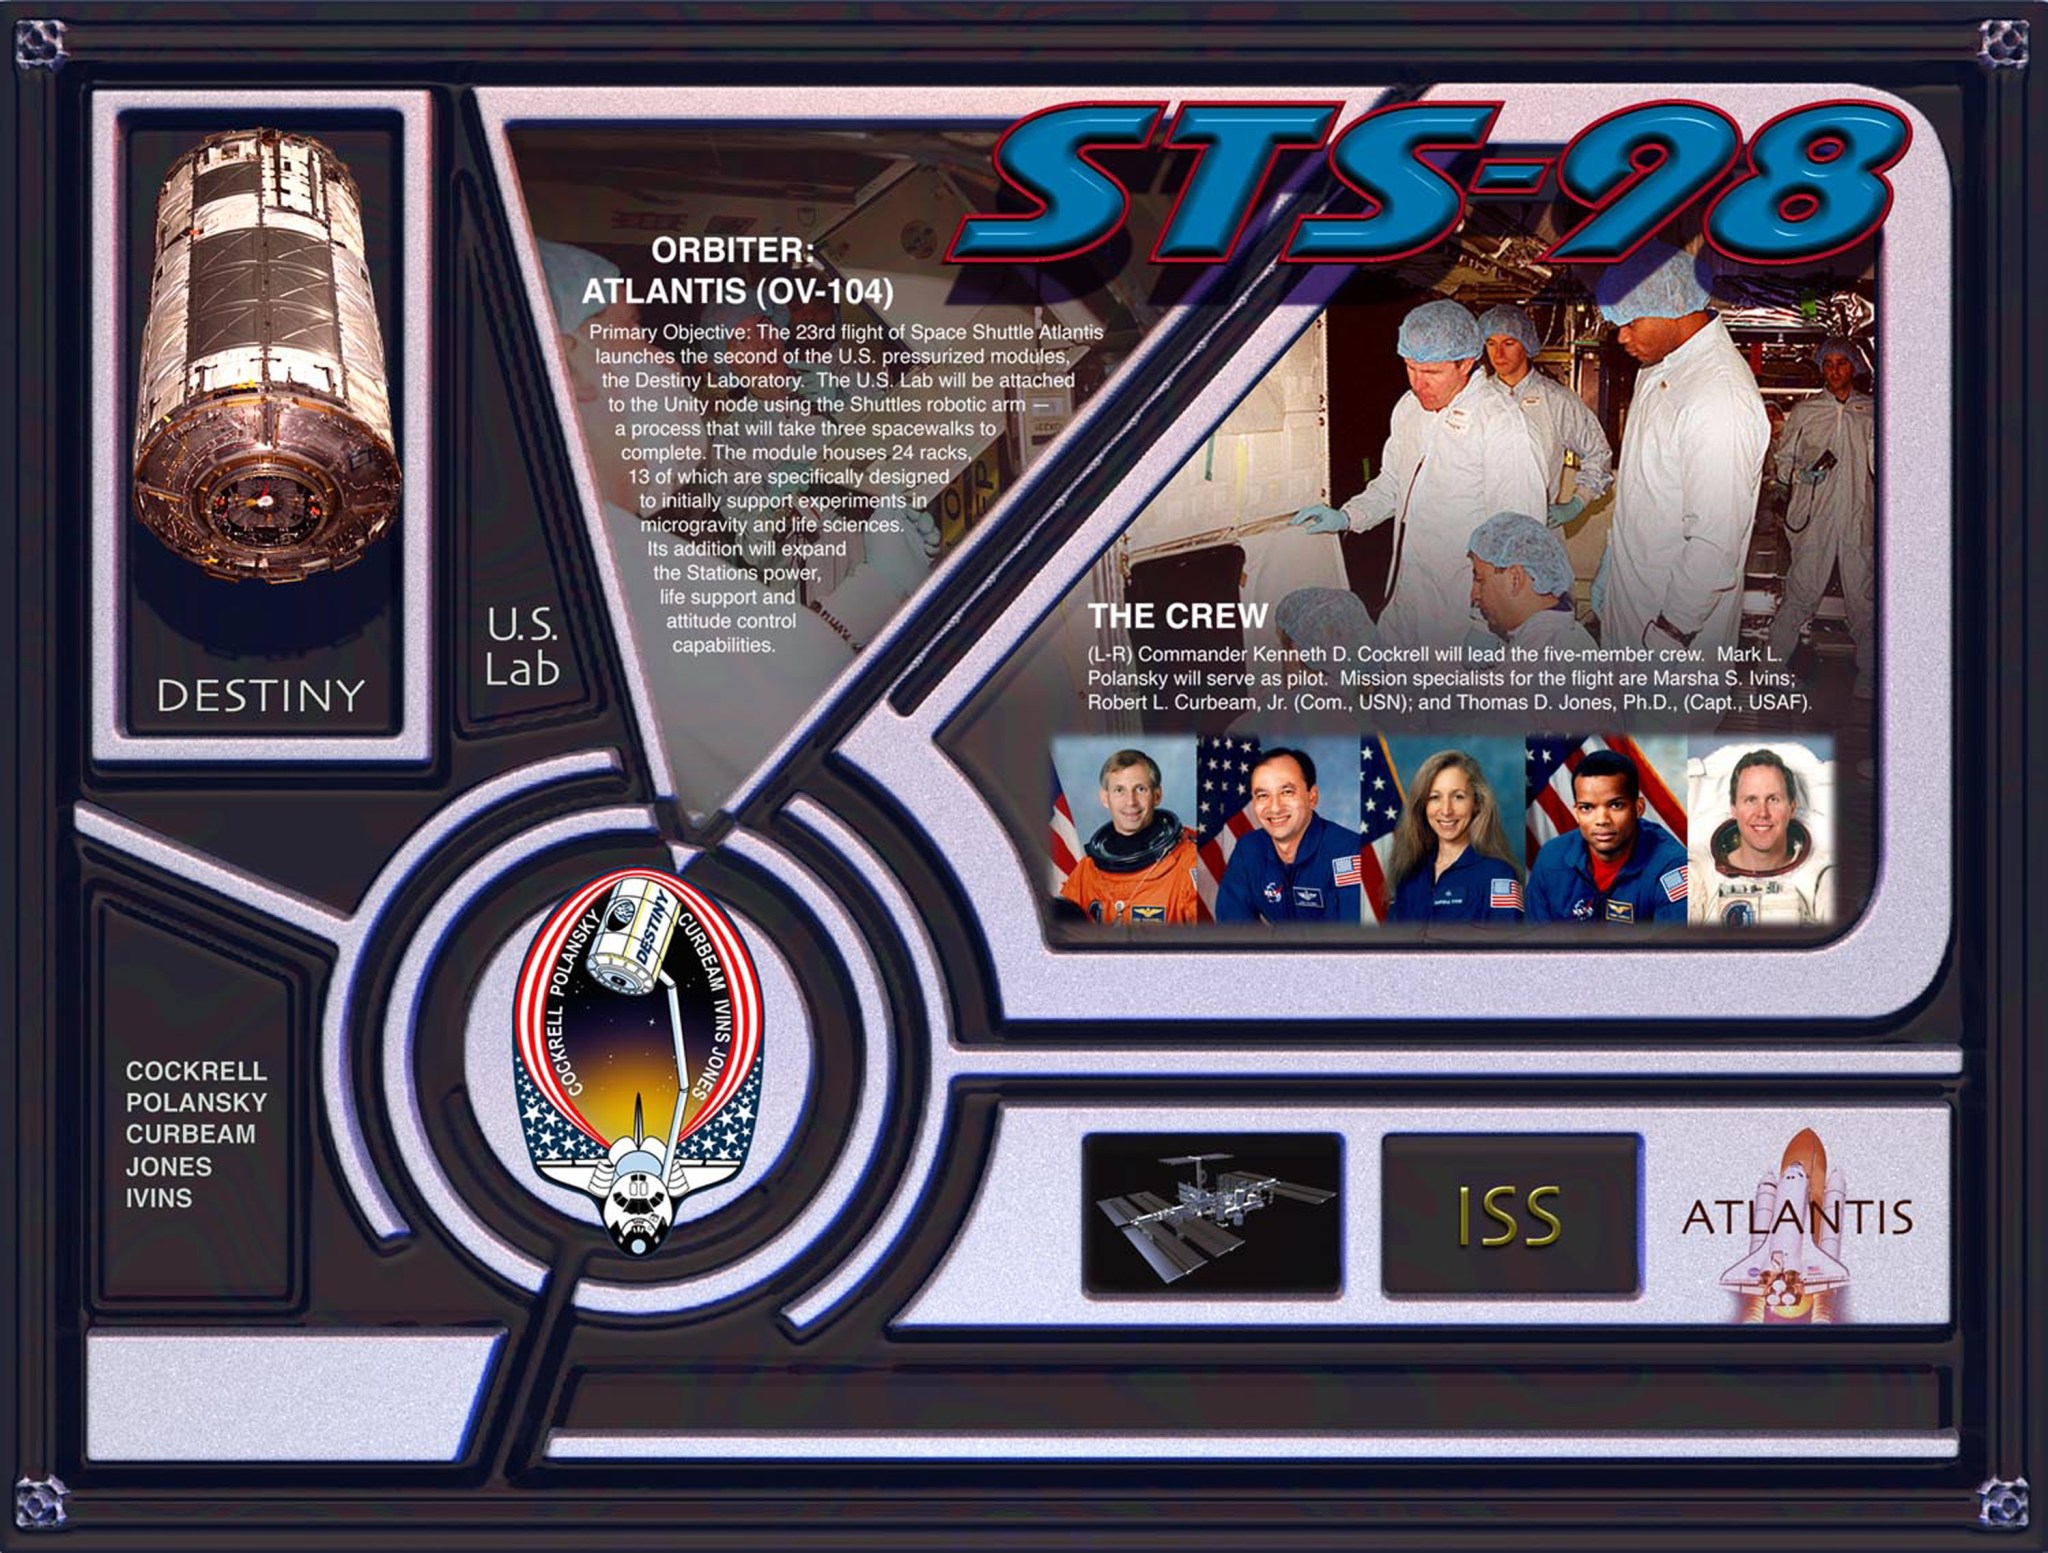 Crew poster for STS-98